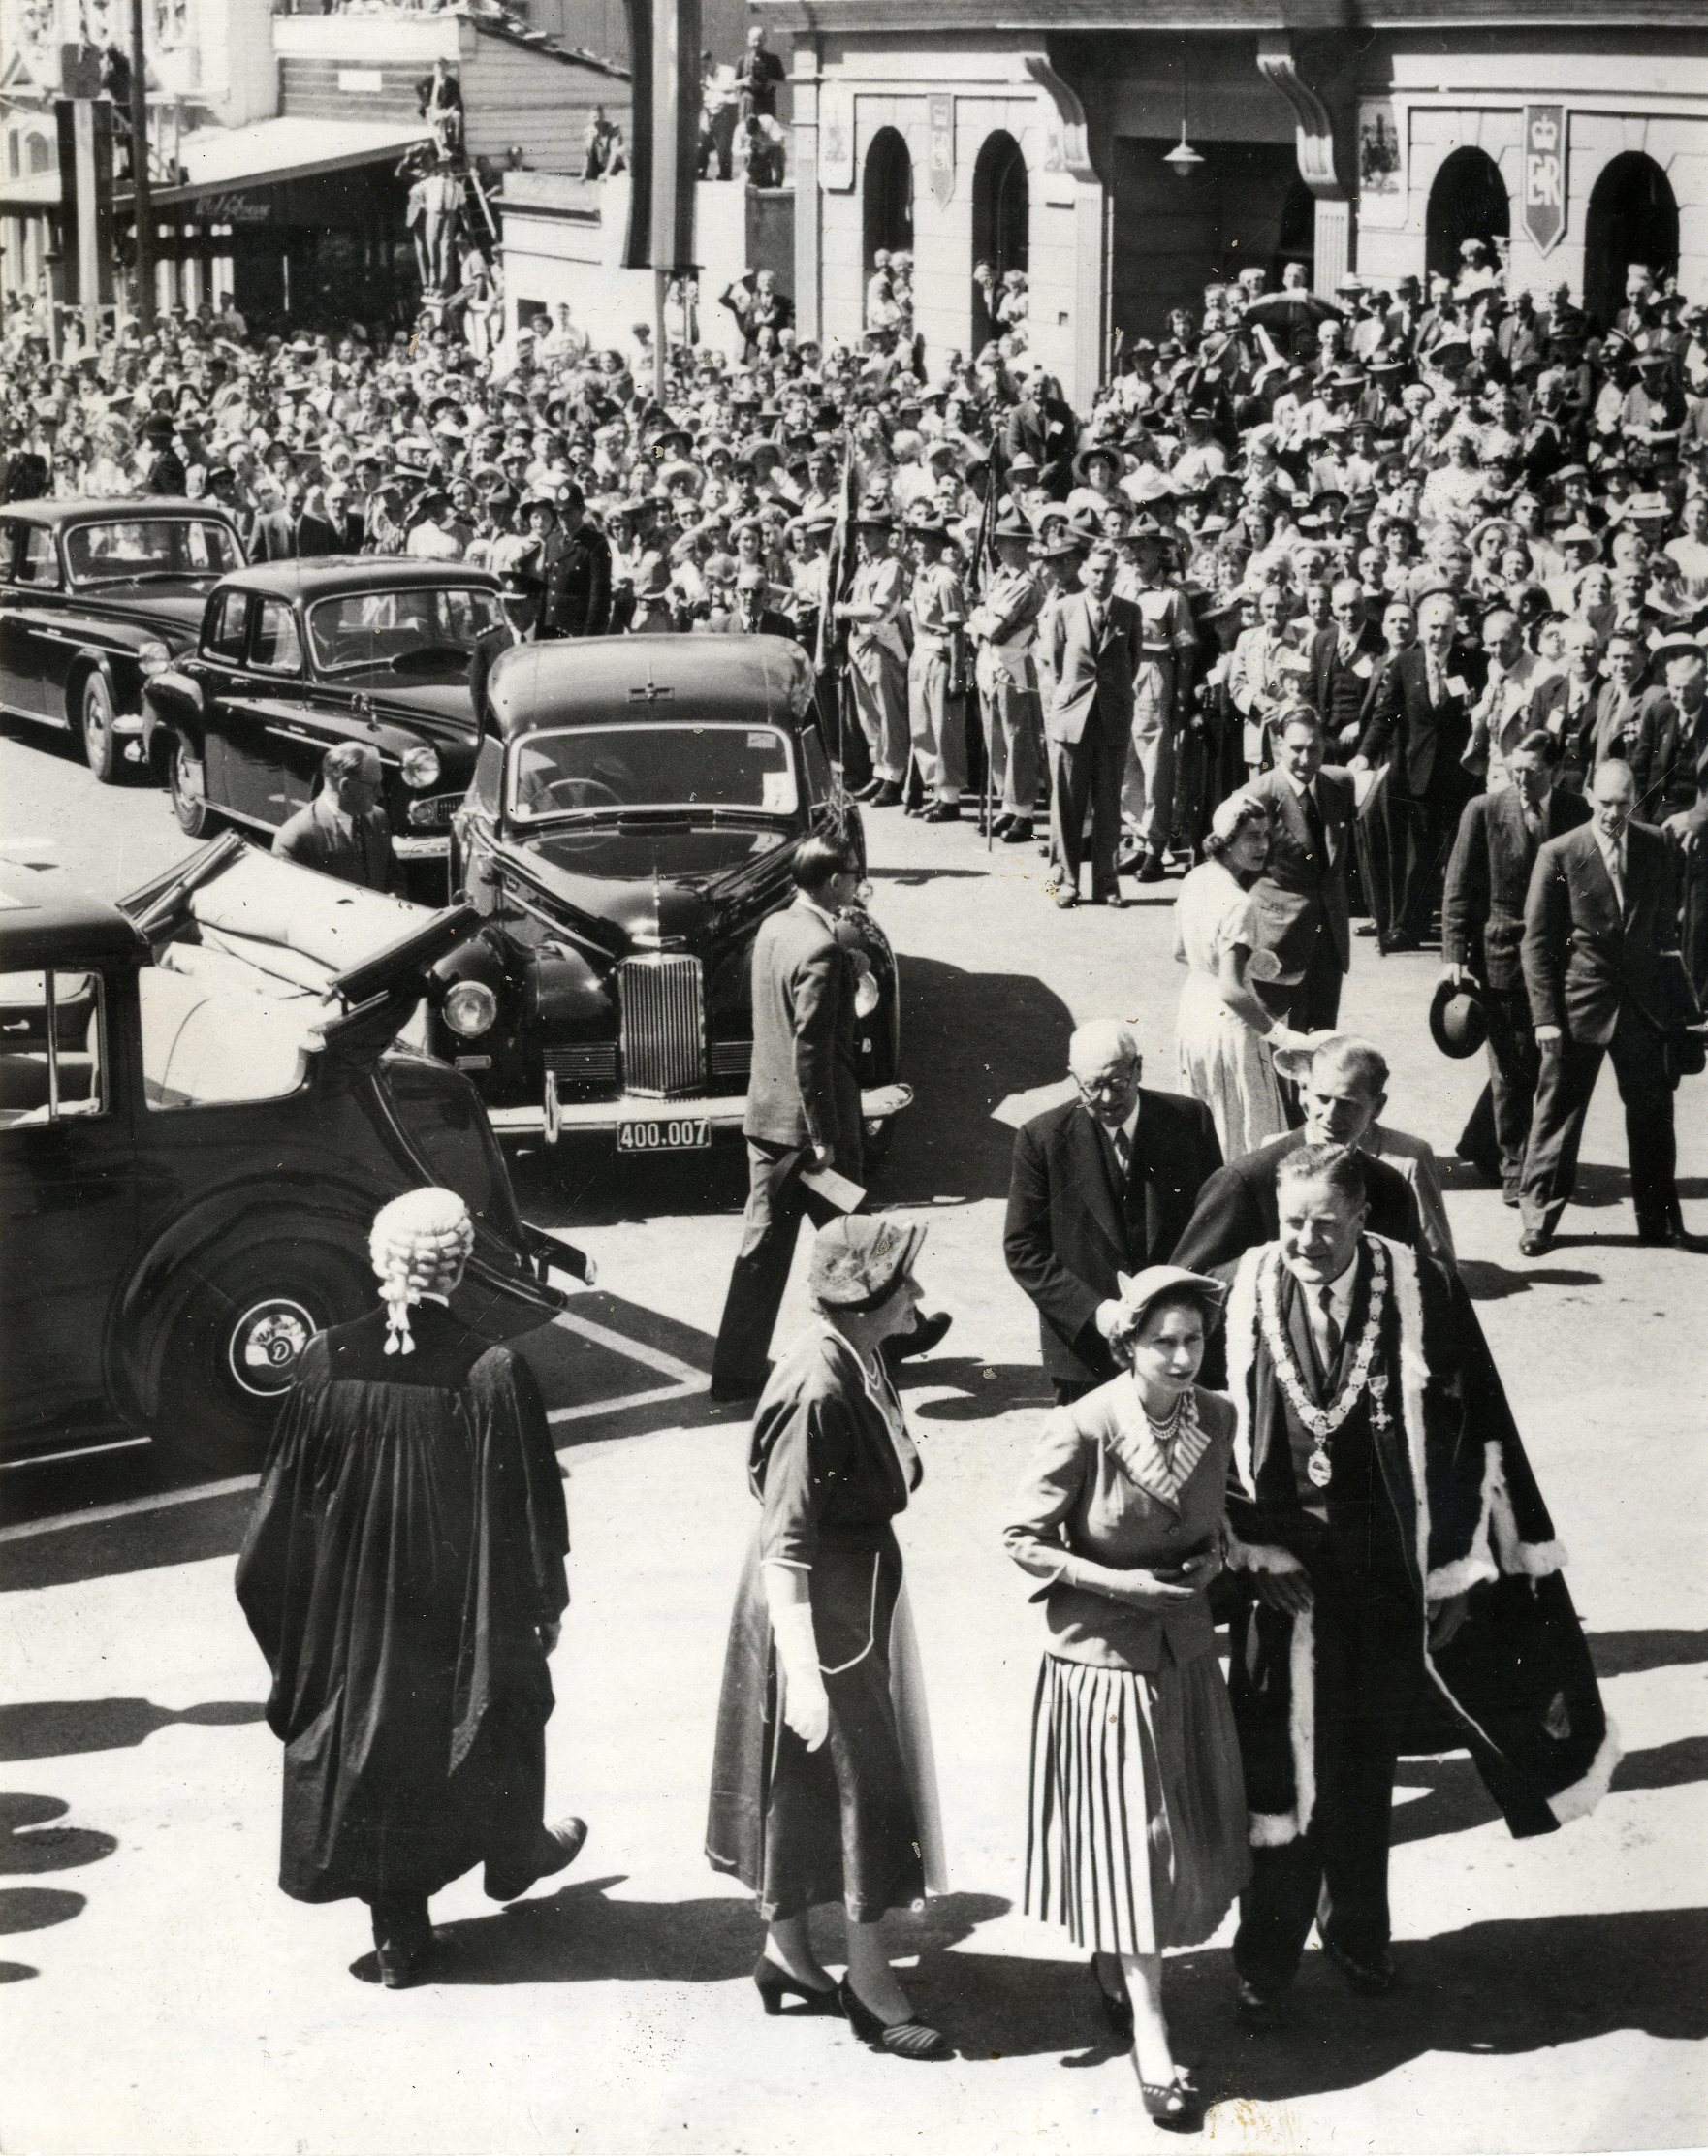 A black and white photograph of Queen Elizabeth II walking away from a long line of Humber cars, accompanied the Duke of Edinburgh and a small group of others including a man in a ceremonial gown and mayoral chain. Behind them, a large crowd of people has gathered beside the cars.